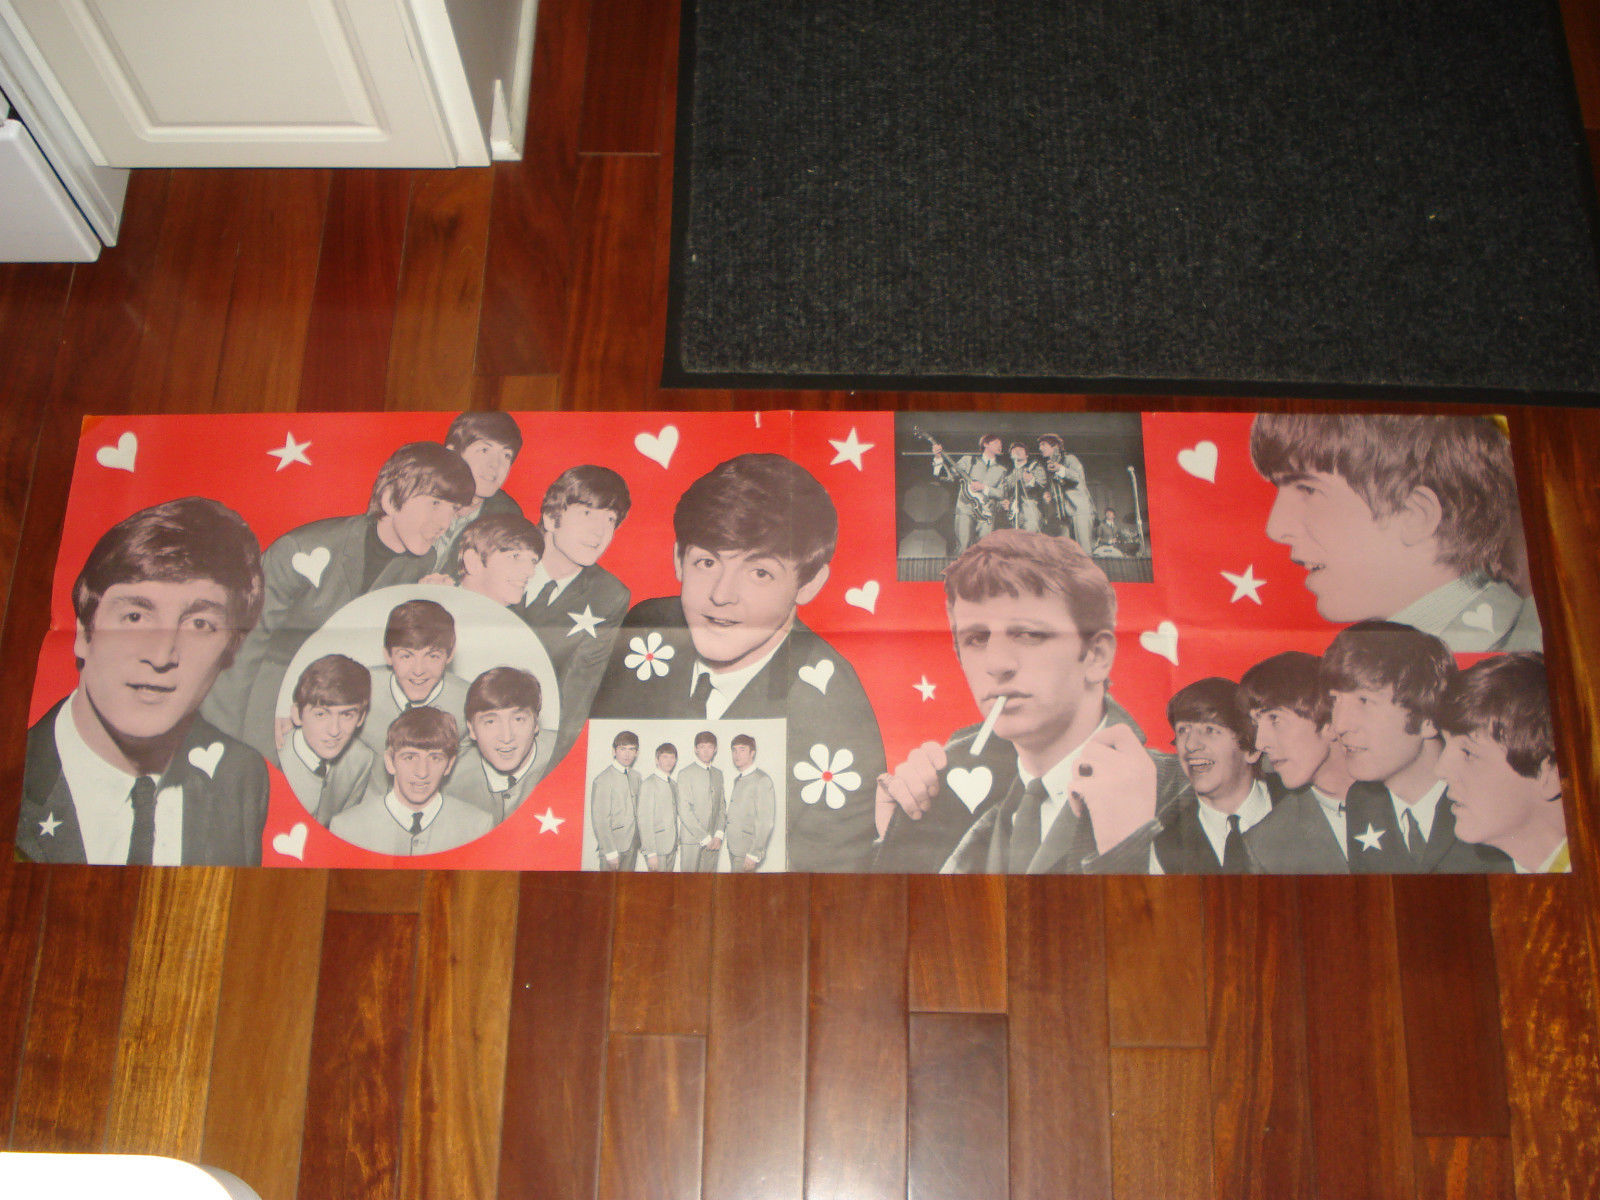 1964 BEATLES BANNER POSTER 17" X 53", ORIGINAL, NOT THE COMMON DELL POSTER, RARE